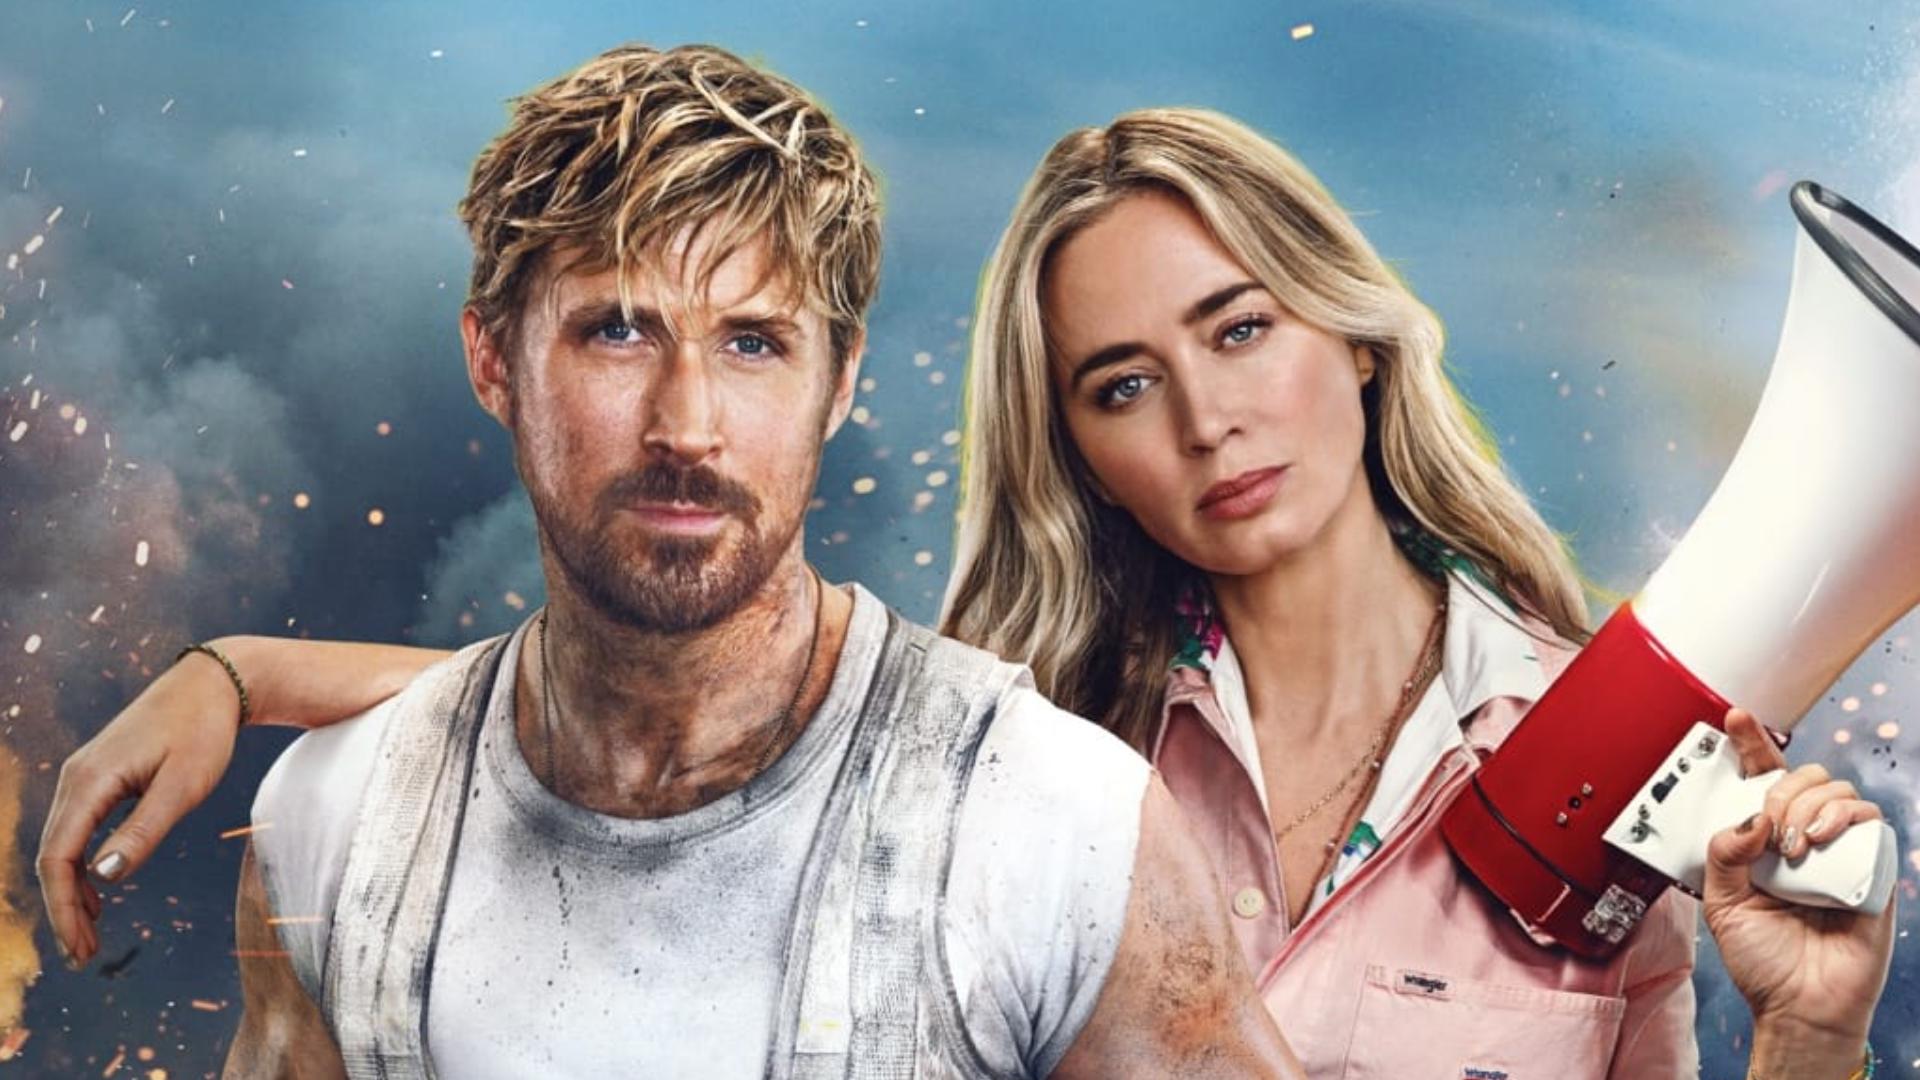 The new movie starring Ryan Gosling and Emily Blunt blends comedy with death-defying stunts. #k5evening